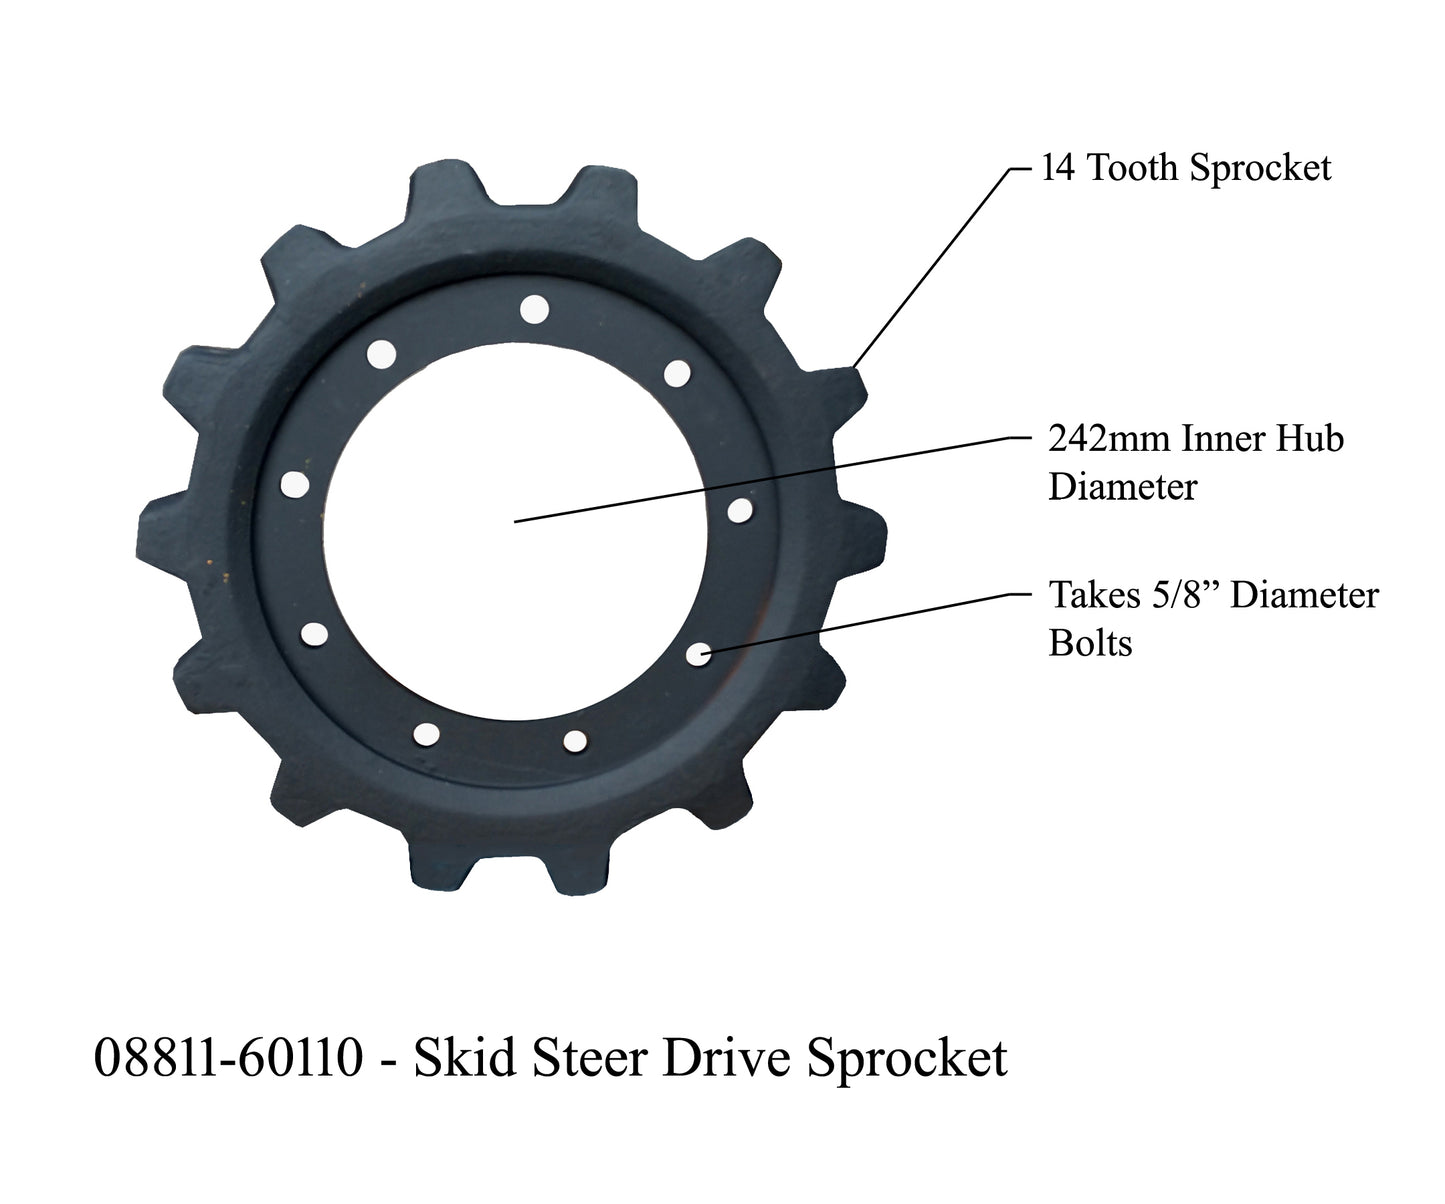 Drive Sprocket,14 Tooth, 9 Bolt, 242mm, Fits Many Skid Steers- 08811-60110